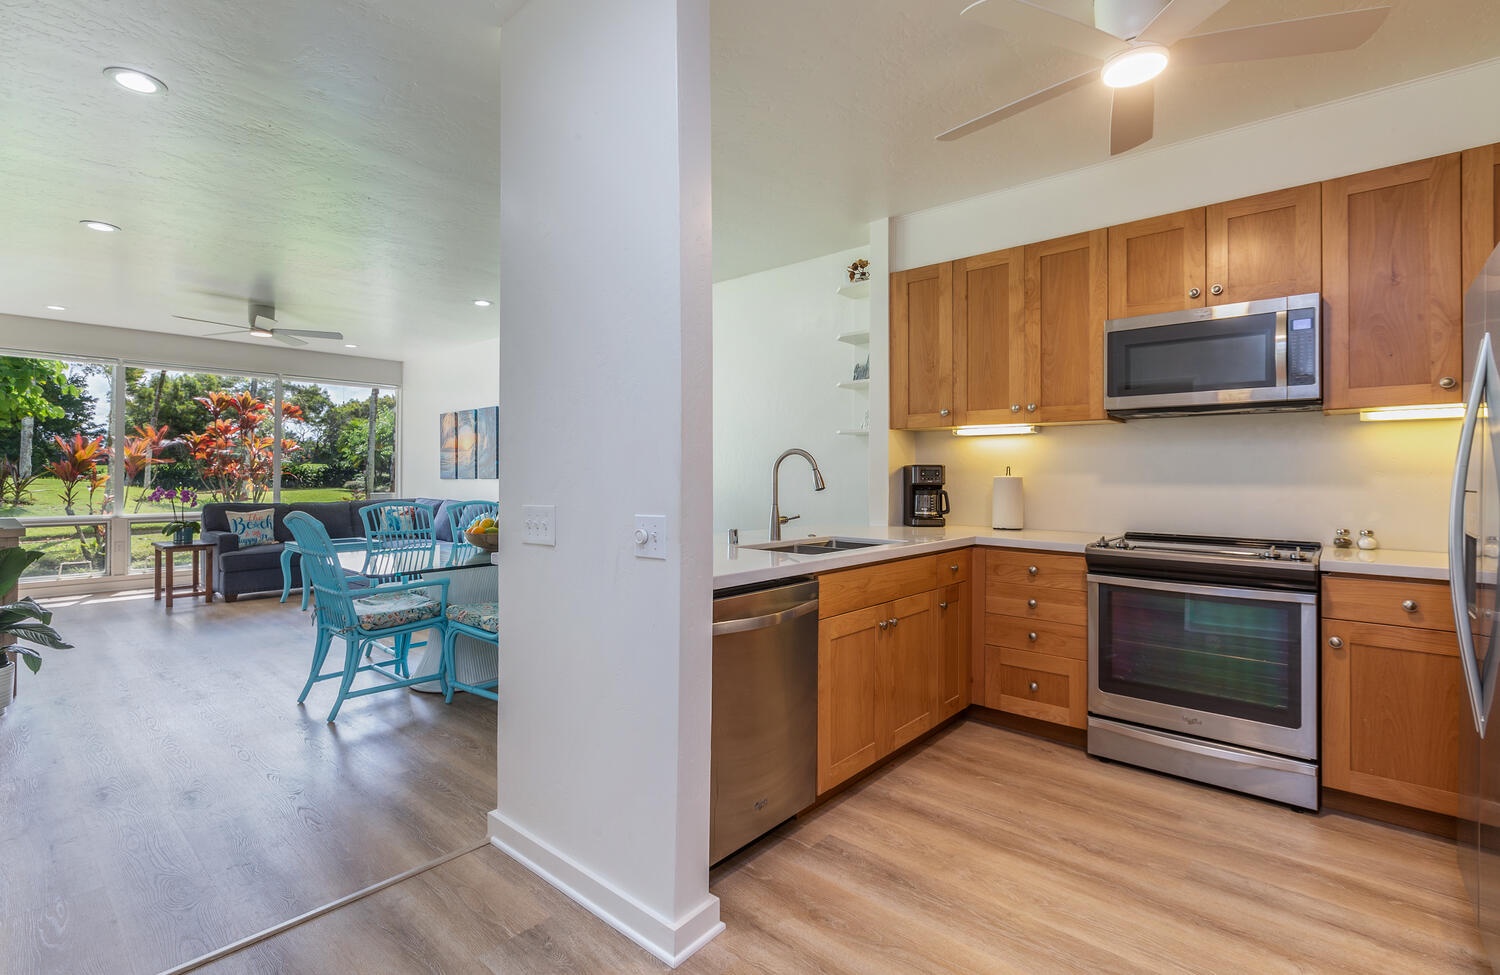 Princeville Vacation Rentals, Emmalani Court 414 - Kitchen overlooks dining and living areas